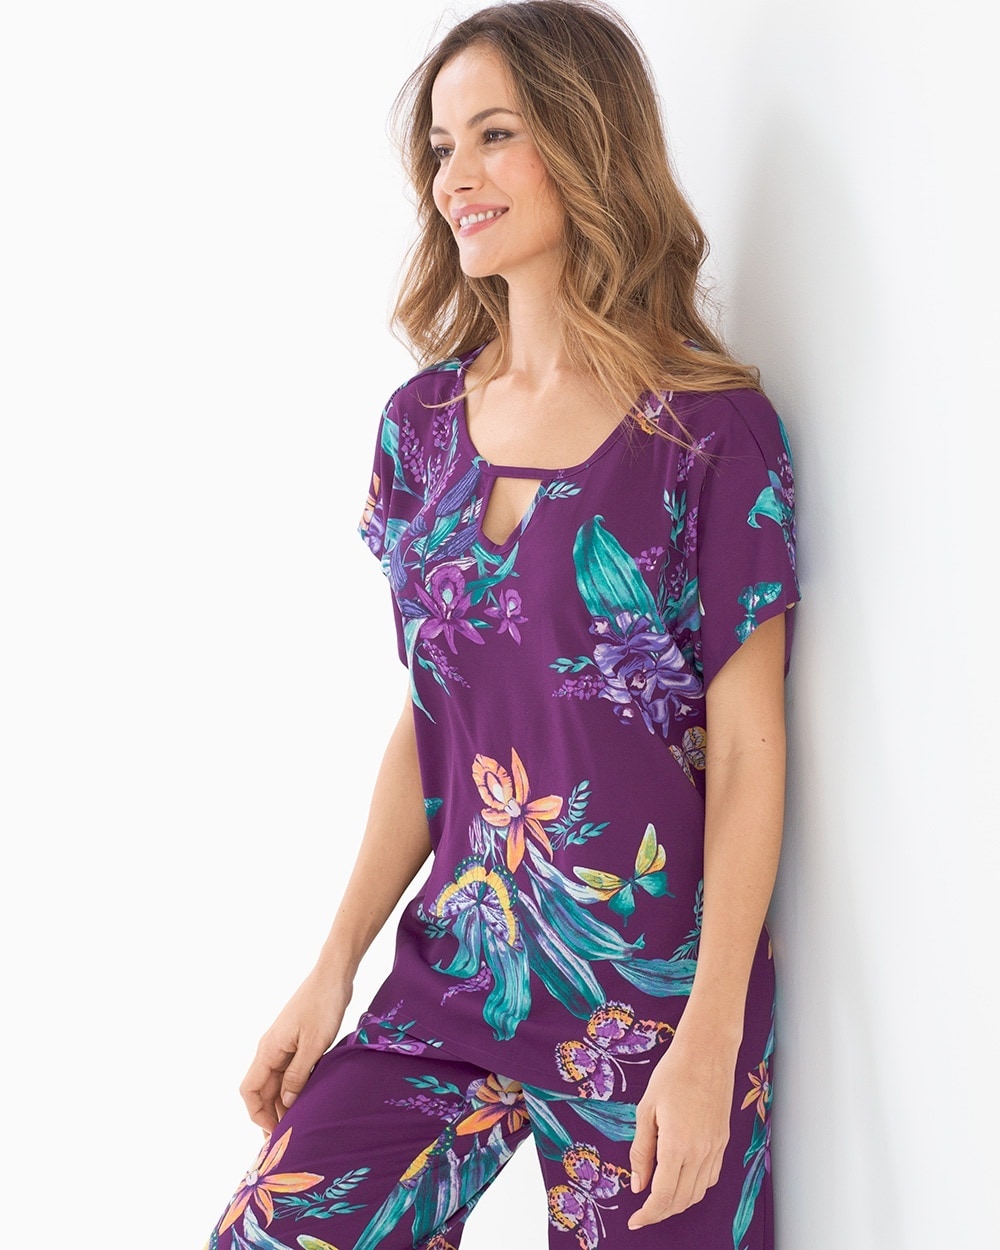 Drama Pajama Short Sleeve Top Exotic Floral Imperial